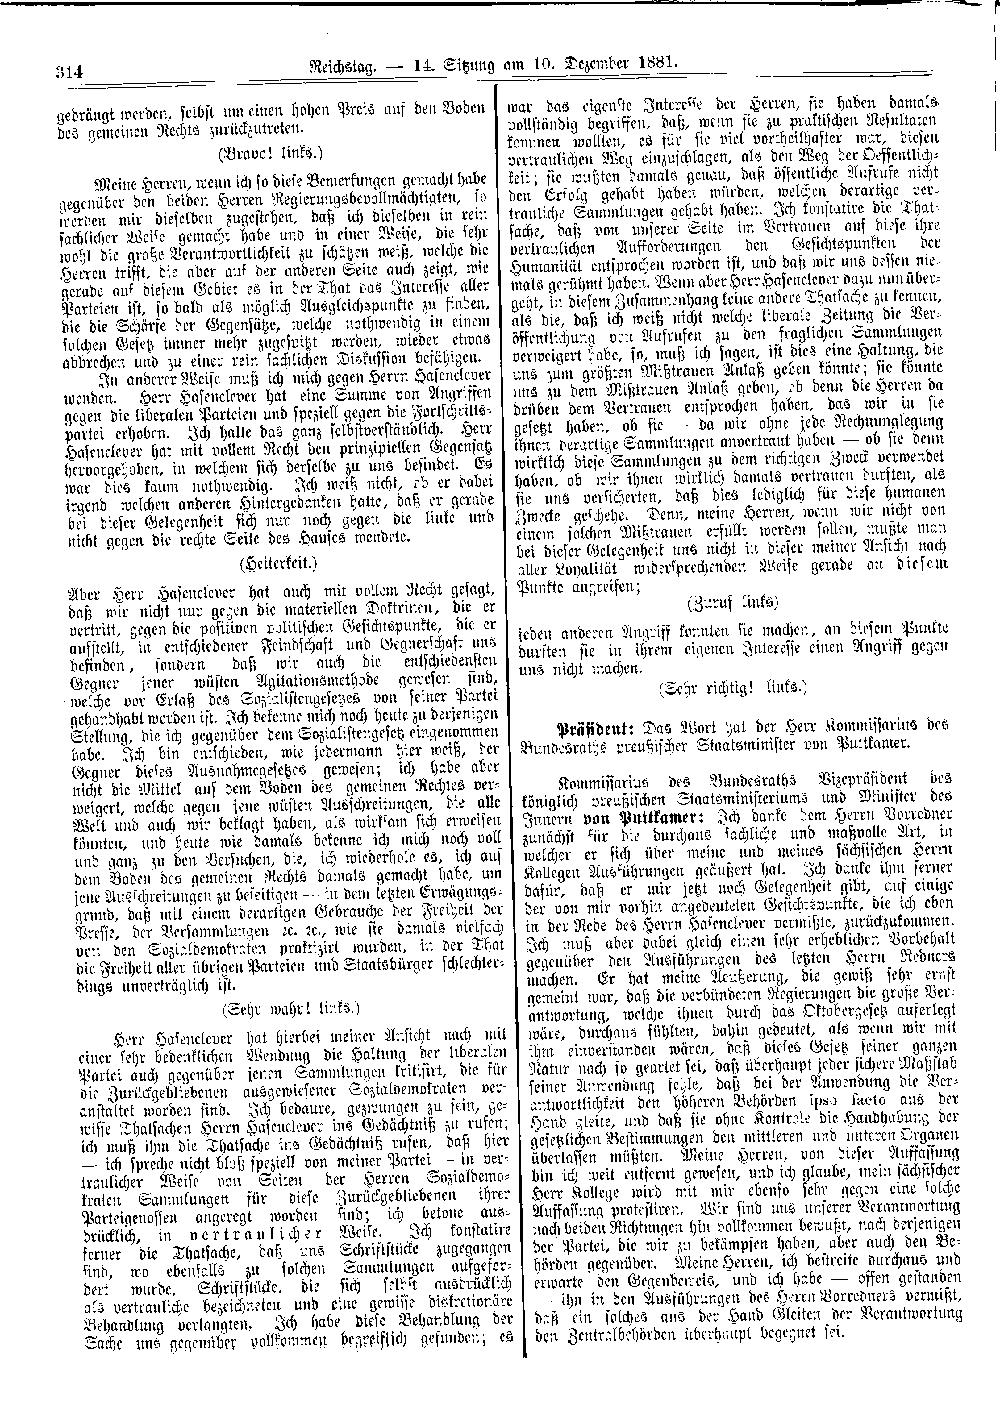 Scan of page 314